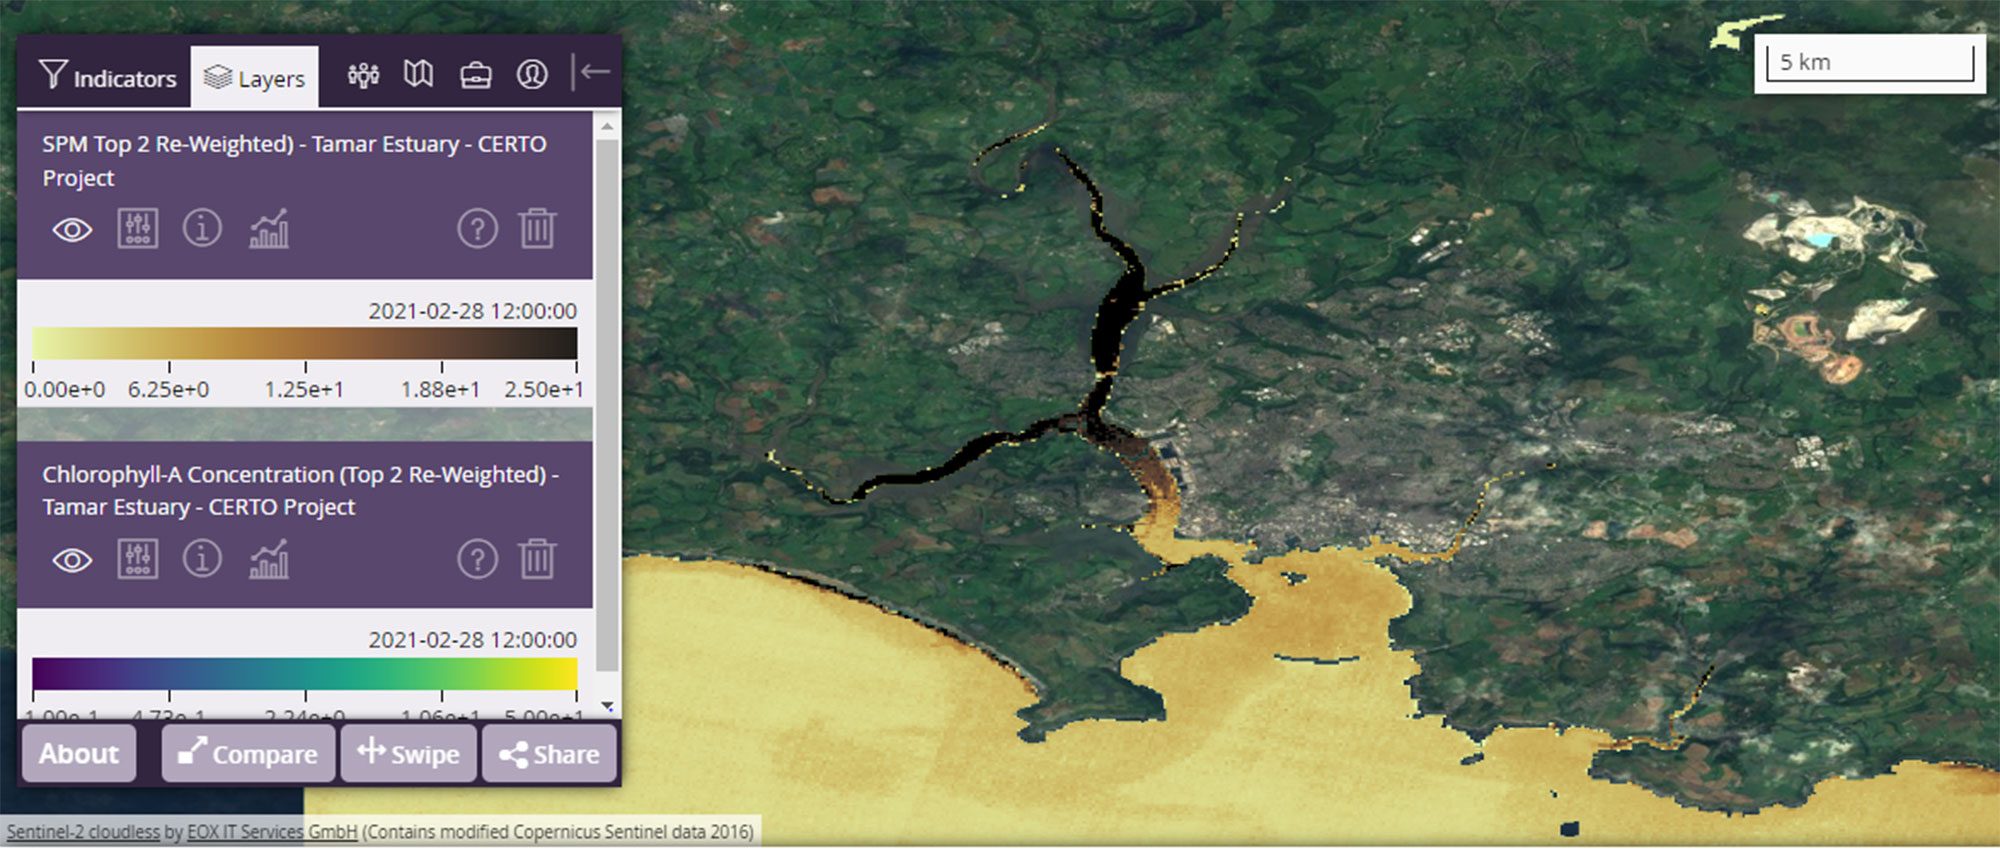 Satellite image showing Total suspended matter concentration in the river Tamar near Plymouth